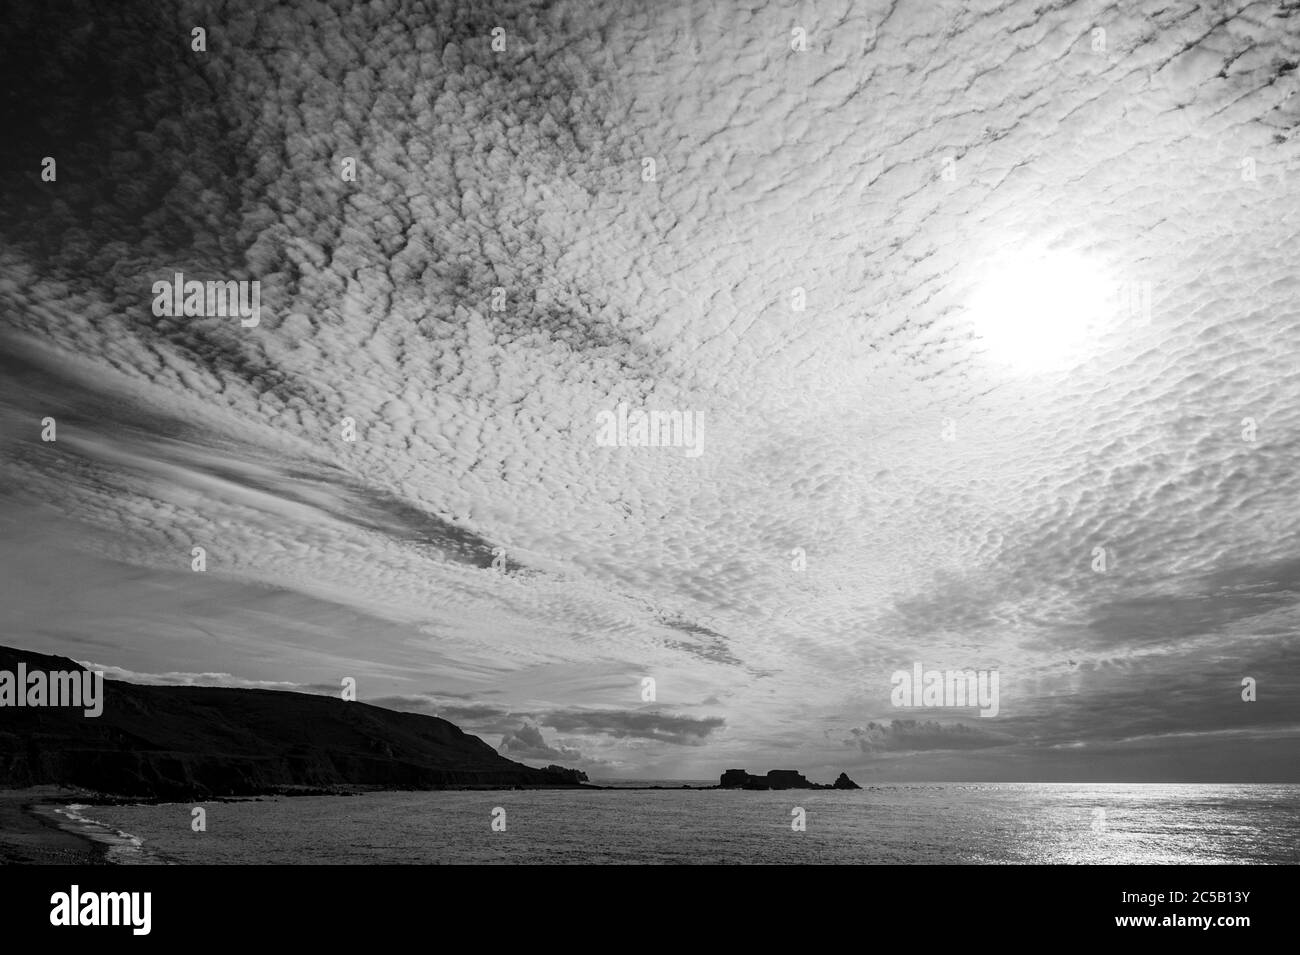 Dramatic sky over Fort Clonque, Alderney, Channel Islands (monochrome image) Stock Photo